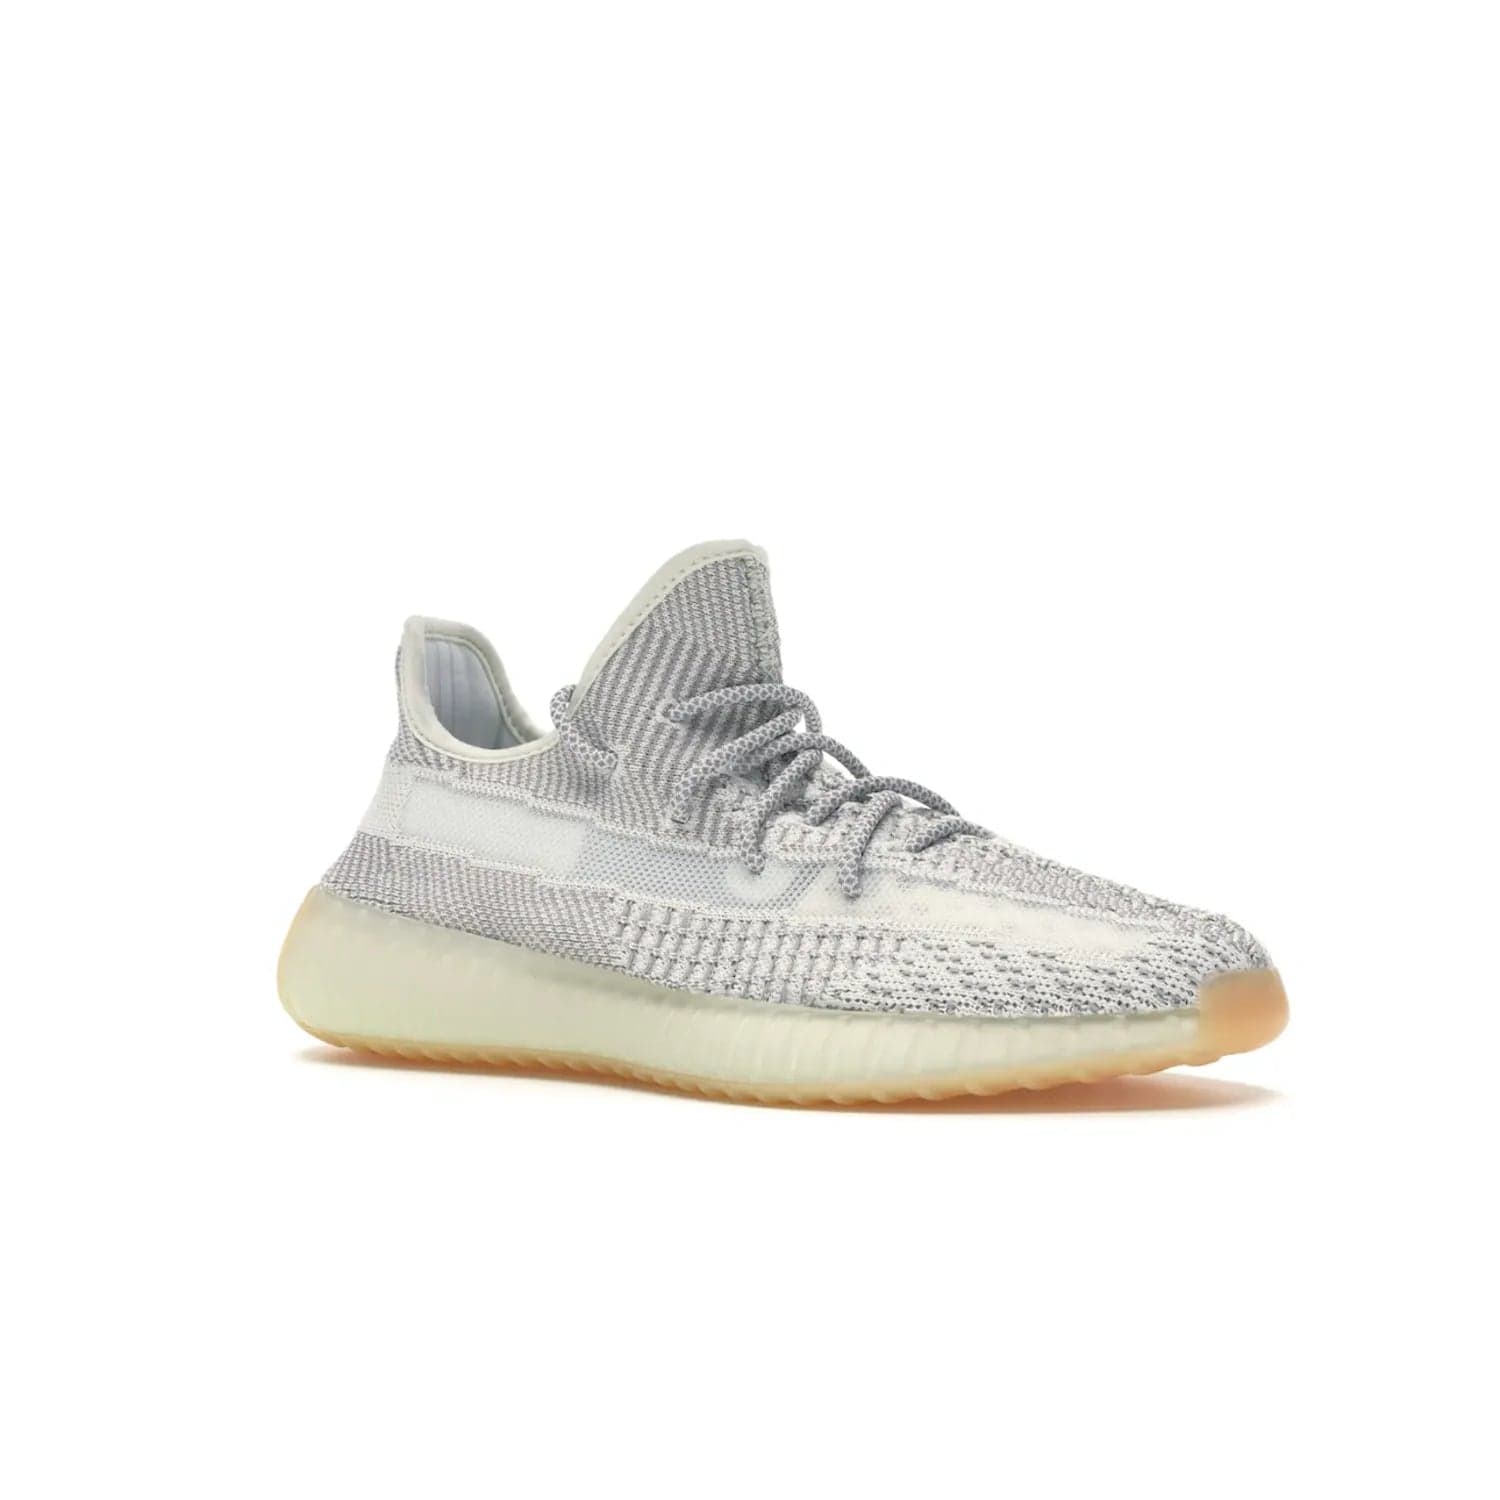 adidas Yeezy Boost 350 V2 Yeshaya (Non-Reflective) - Image 4 - Only at www.BallersClubKickz.com - Step out in style with the adidas Yeezy Boost 350 V2 Yeshaya (Non-Reflective). Gray-and-white Primeknit upper with mesh side stripe & rope laces, plus a translucent Boost sole with a hint of yellow. Make a statement and feel comfortable with this stylish sneaker.